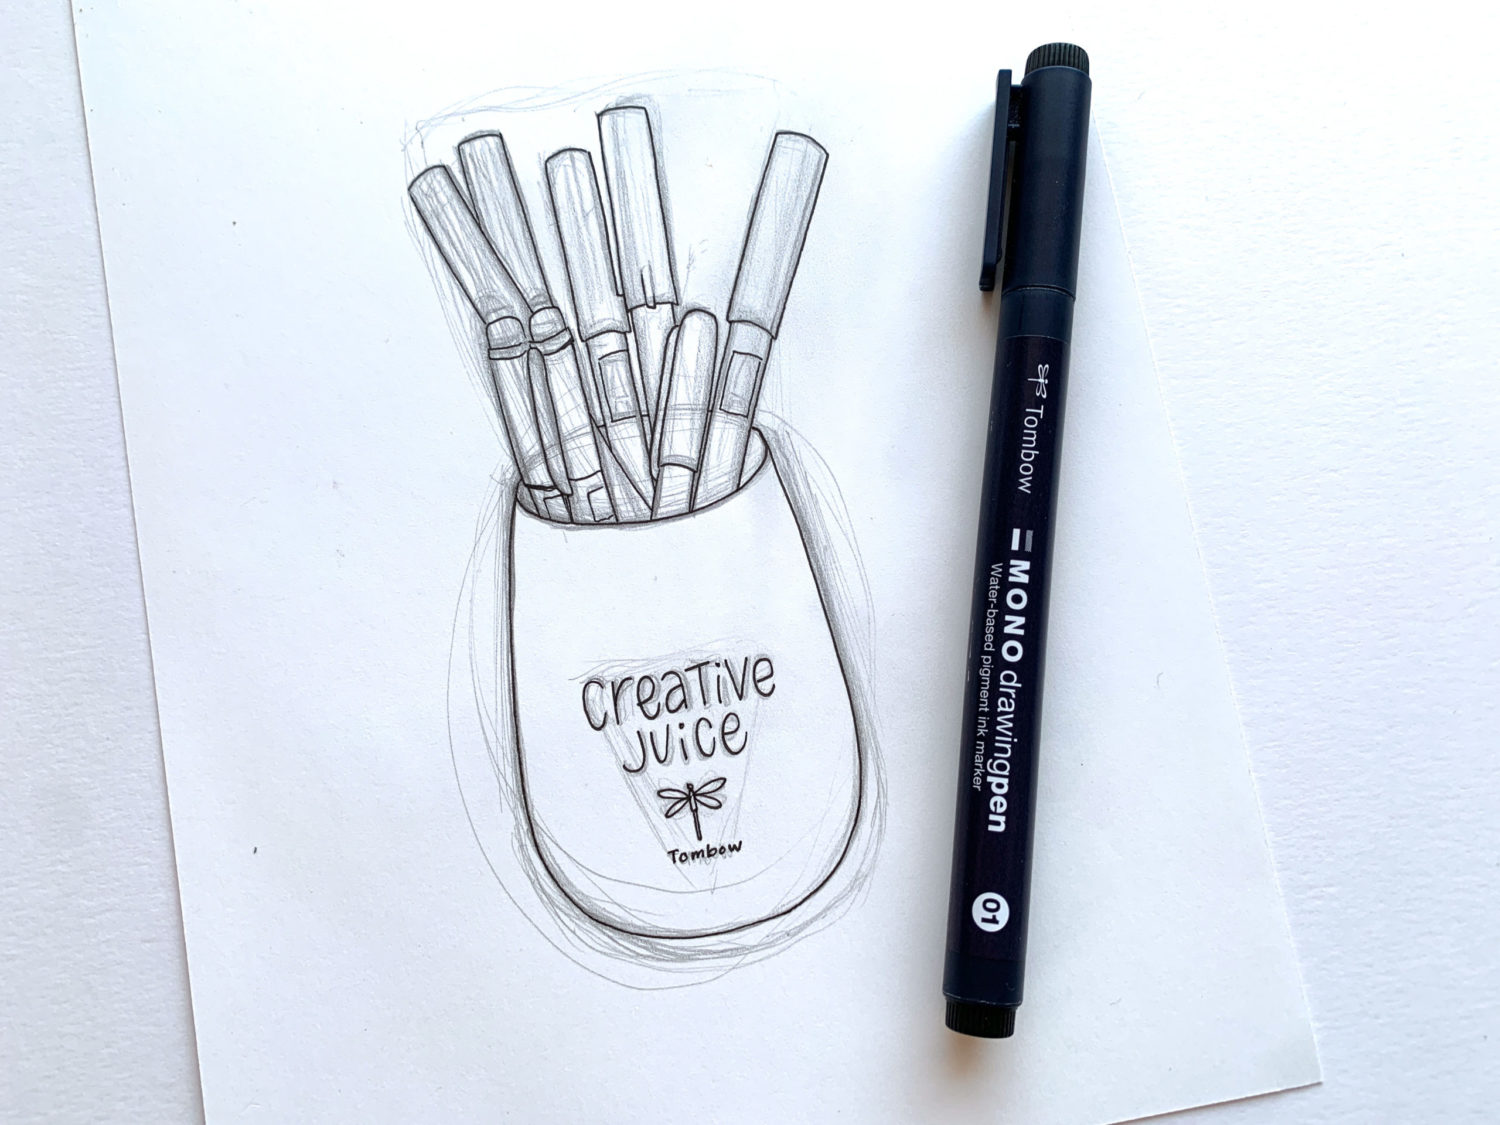 Drawing a Cup Full of Markers - Ali LePere